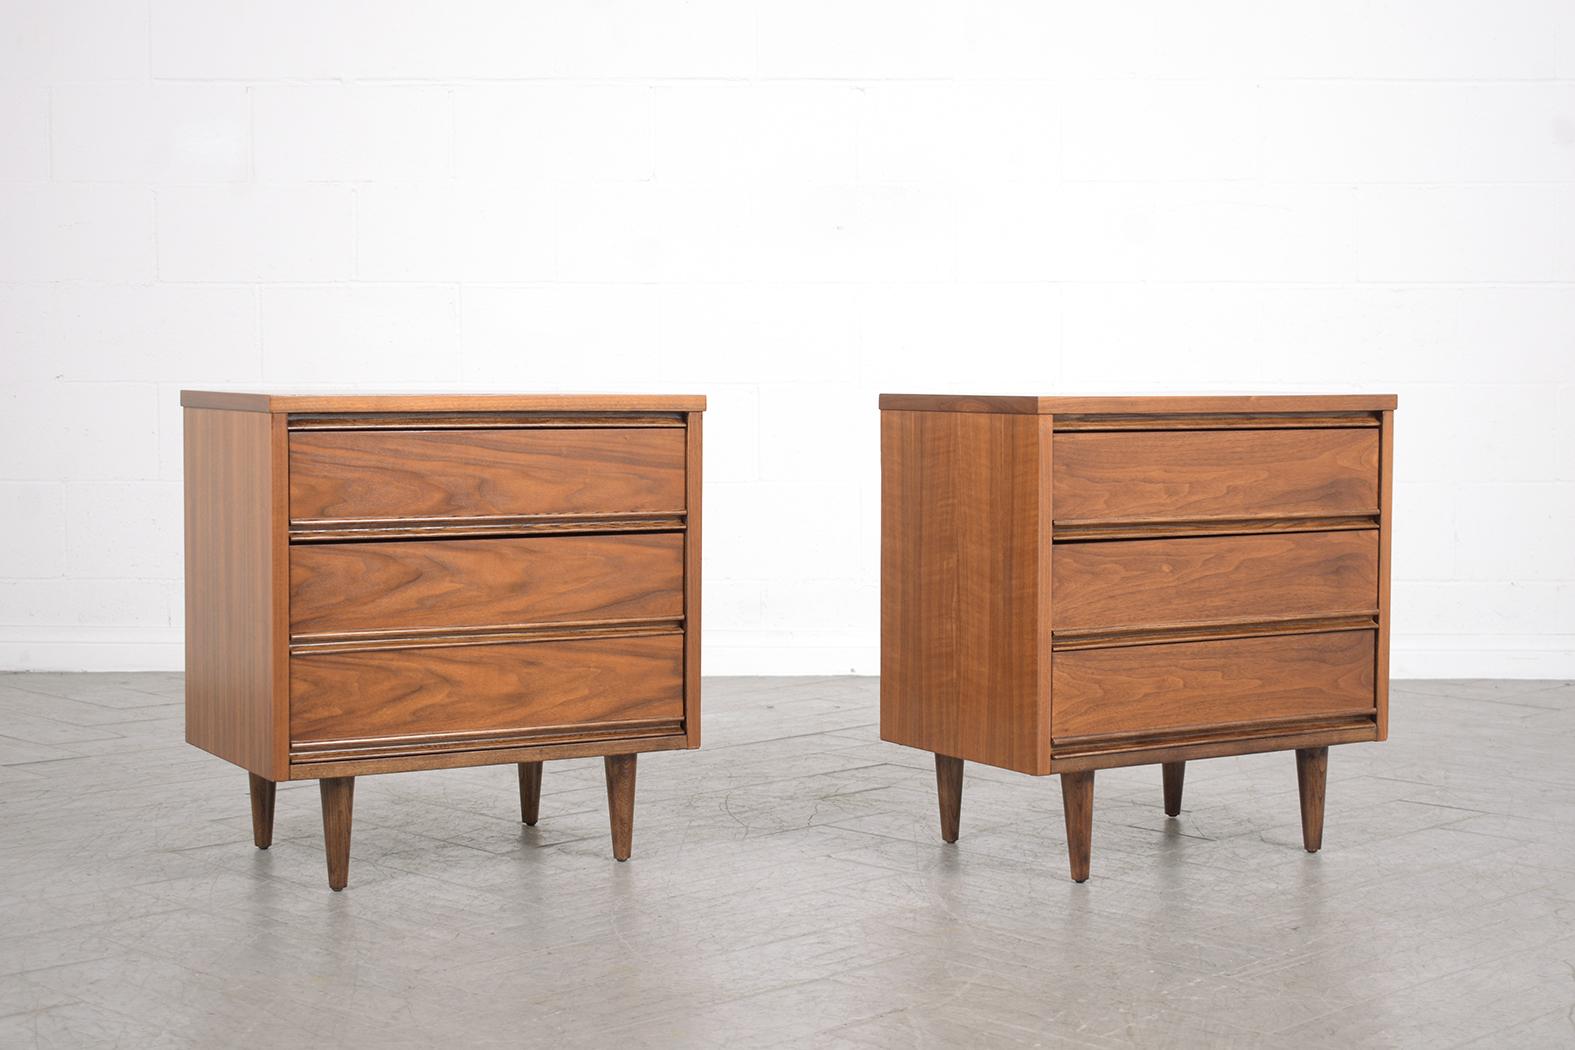 This Pair of 1960s vintage mid-century modern nightstands are crafted out of walnut wood that has been stained in a rich mahogany color with a polished finish and has been fully restored by our team of in-house craftsmen. This set of end tables